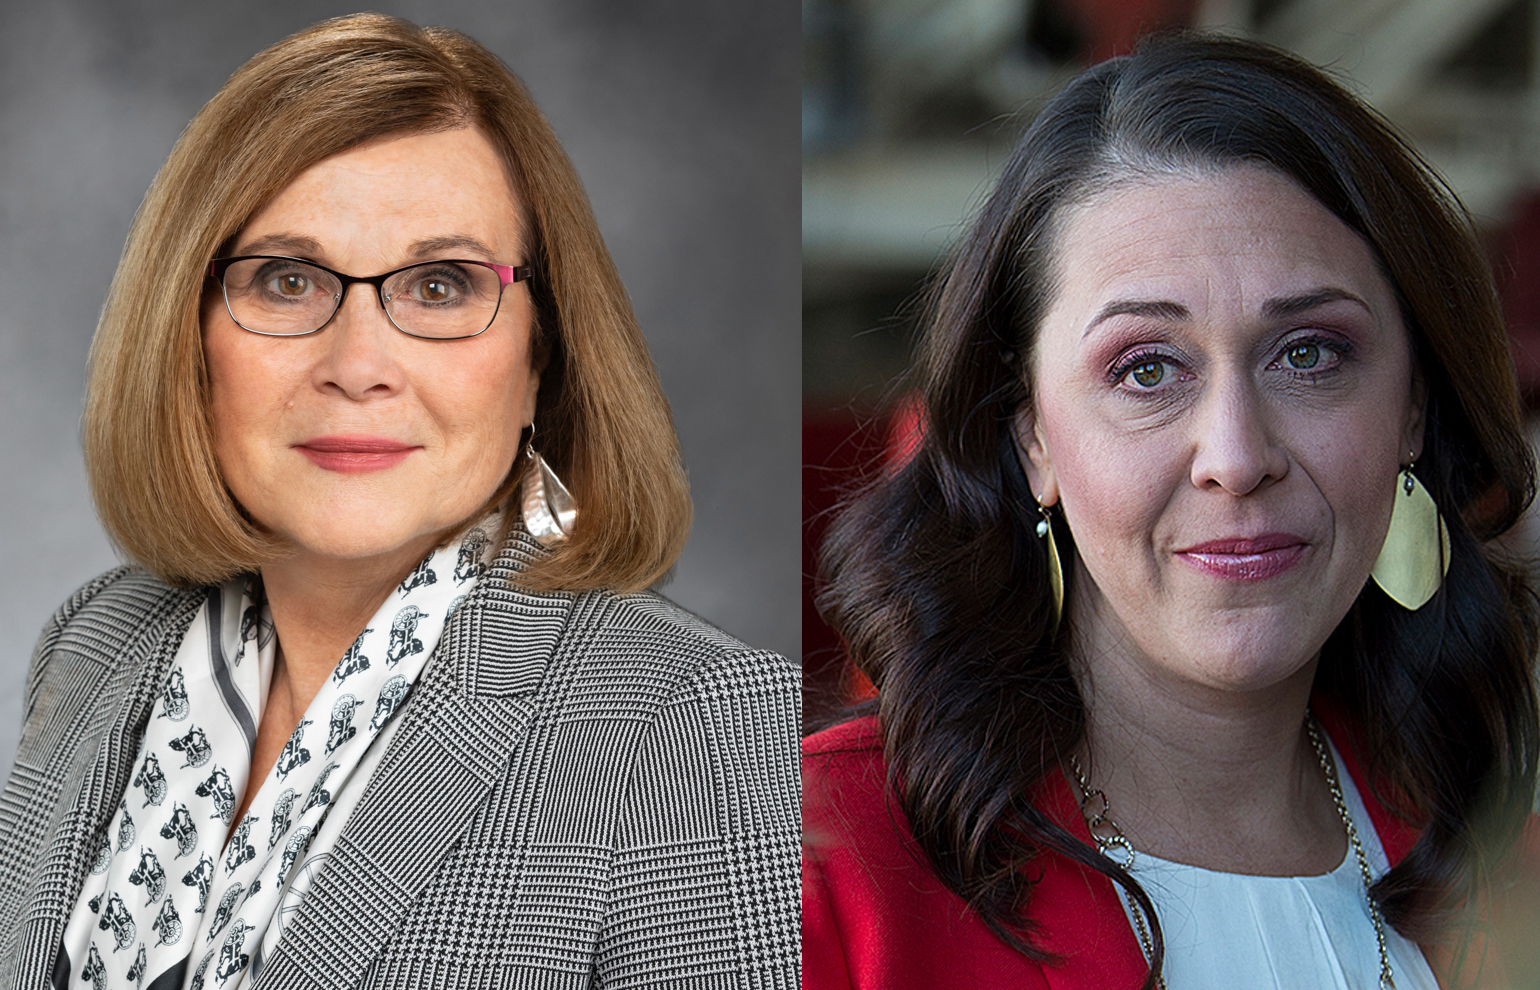 I spoke to Rep. Sharon Wylie, left, and Jaime Herrera Beutler about a topic that could change the the course of politics.